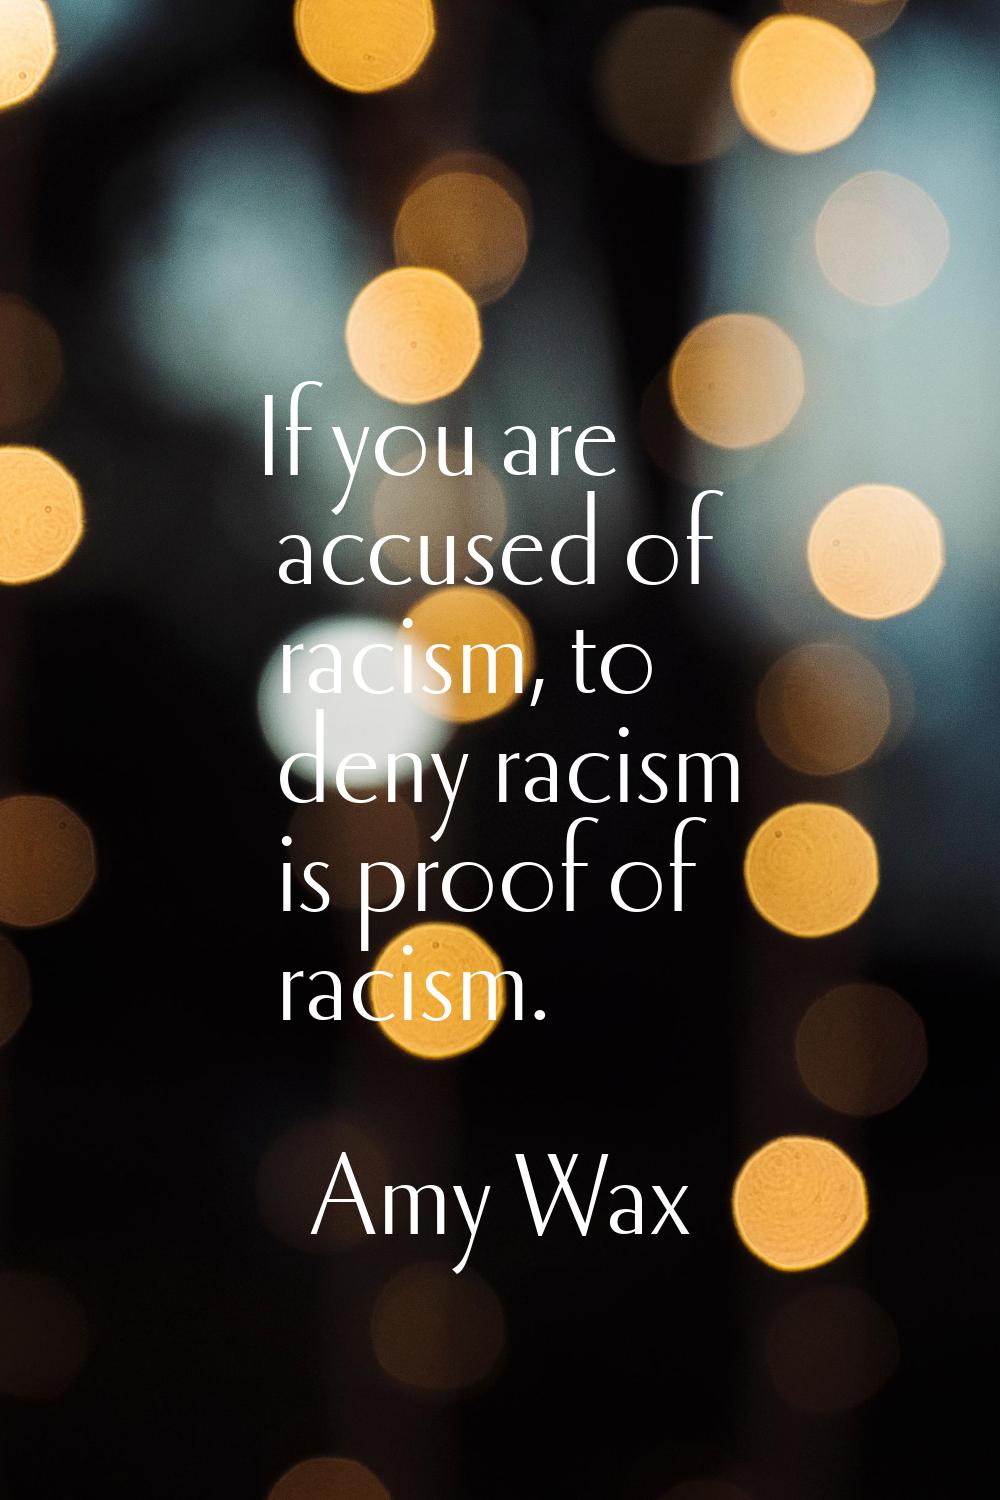 If you are accused of racism, to deny racism is proof of racism.